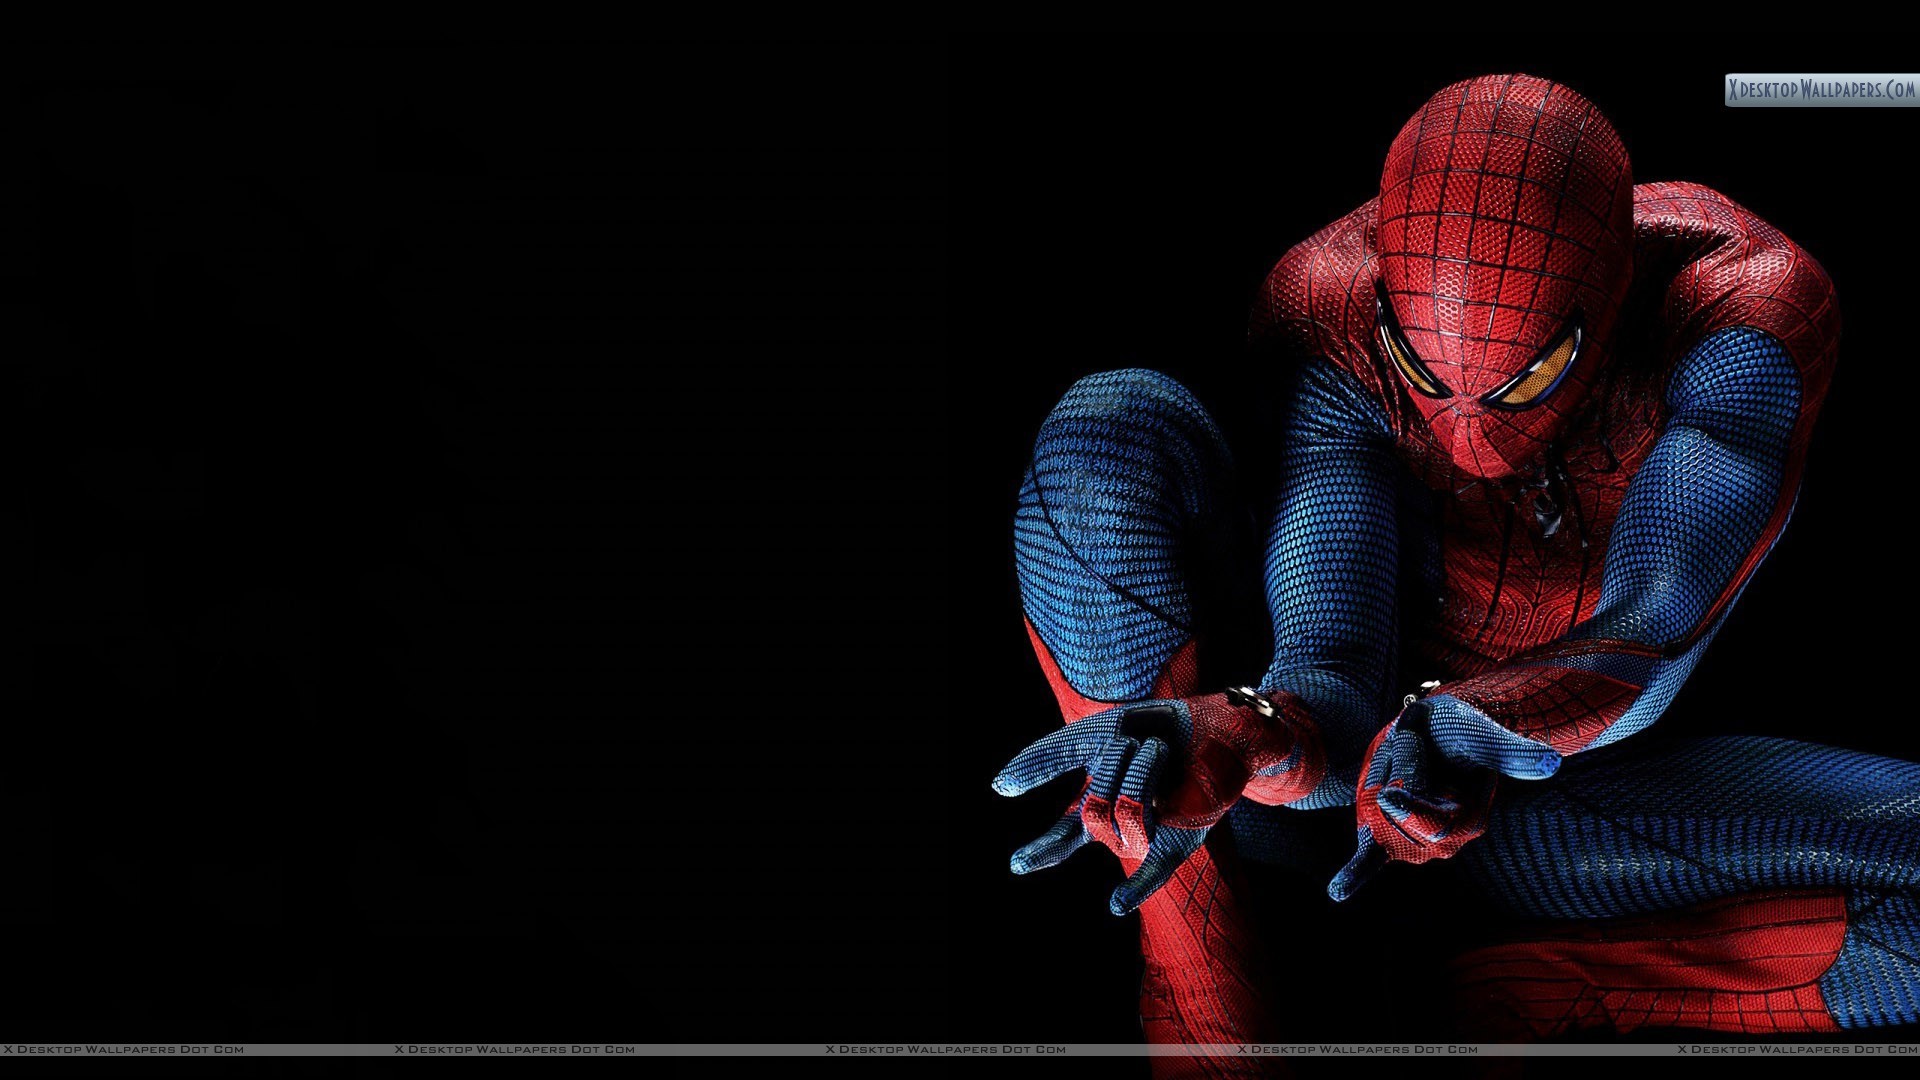 1920x1080 The Superior Spiderman HD Wallpapers Backgrounds Wallpaper 1920Ã1200 Spiderman  Pics | Adorable Wallpapers | Wallpapers | Pinterest | Spiderman pics, Man  ...